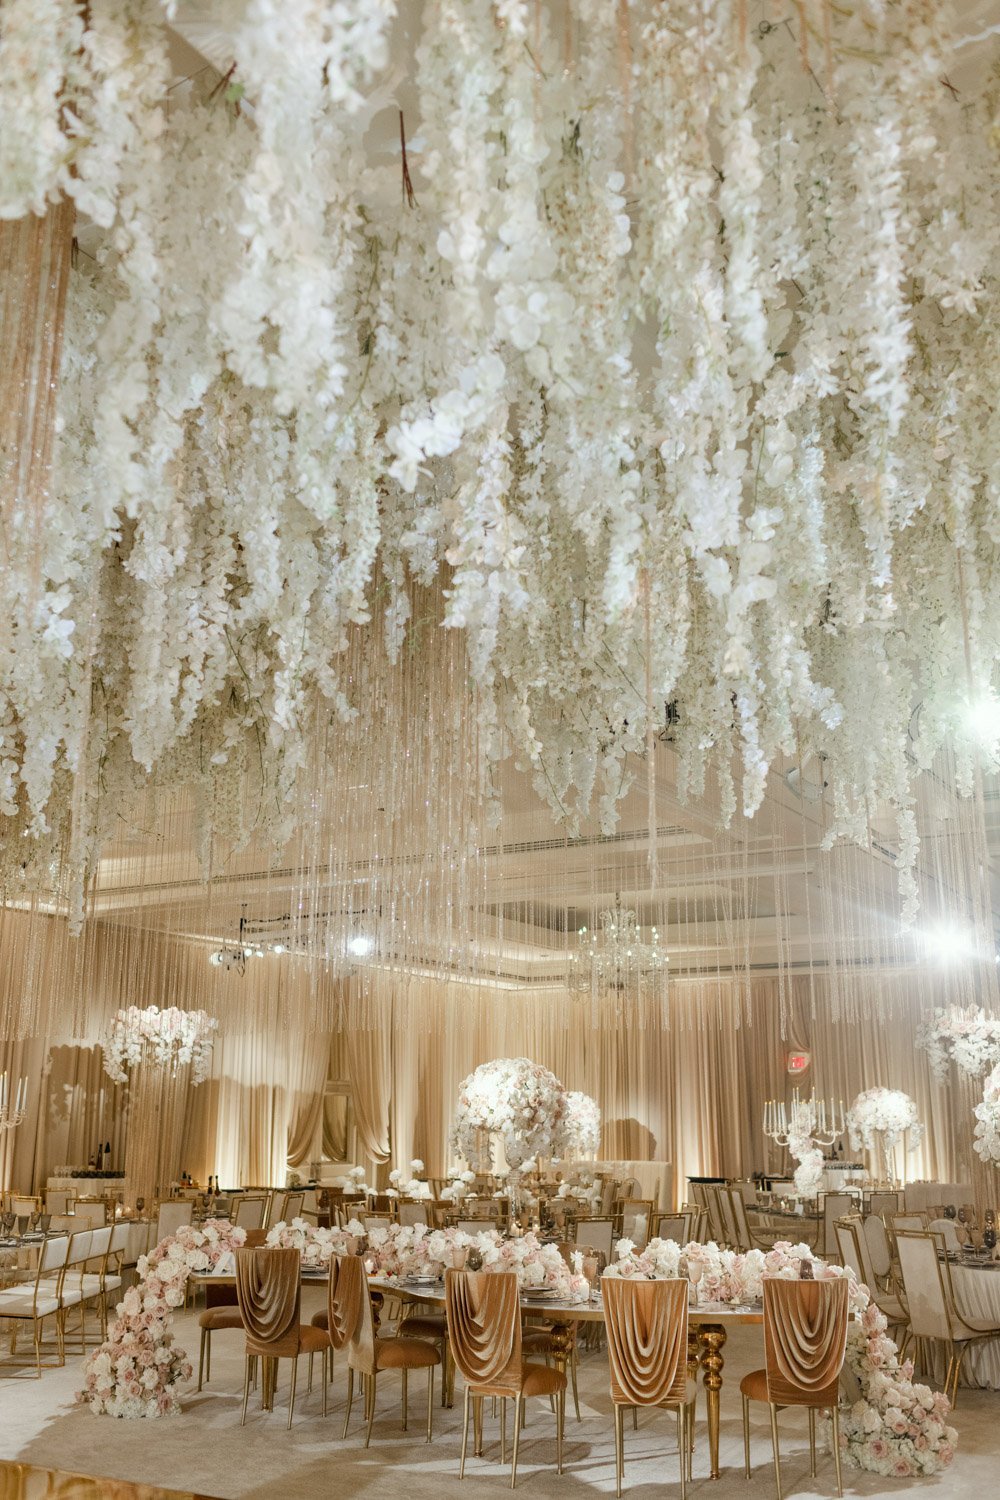 Pale pink and cream roses surrounded by crystals and gold accents create a bright and bold ballroom setting at the Ritz-Carlton Laguna Niguel